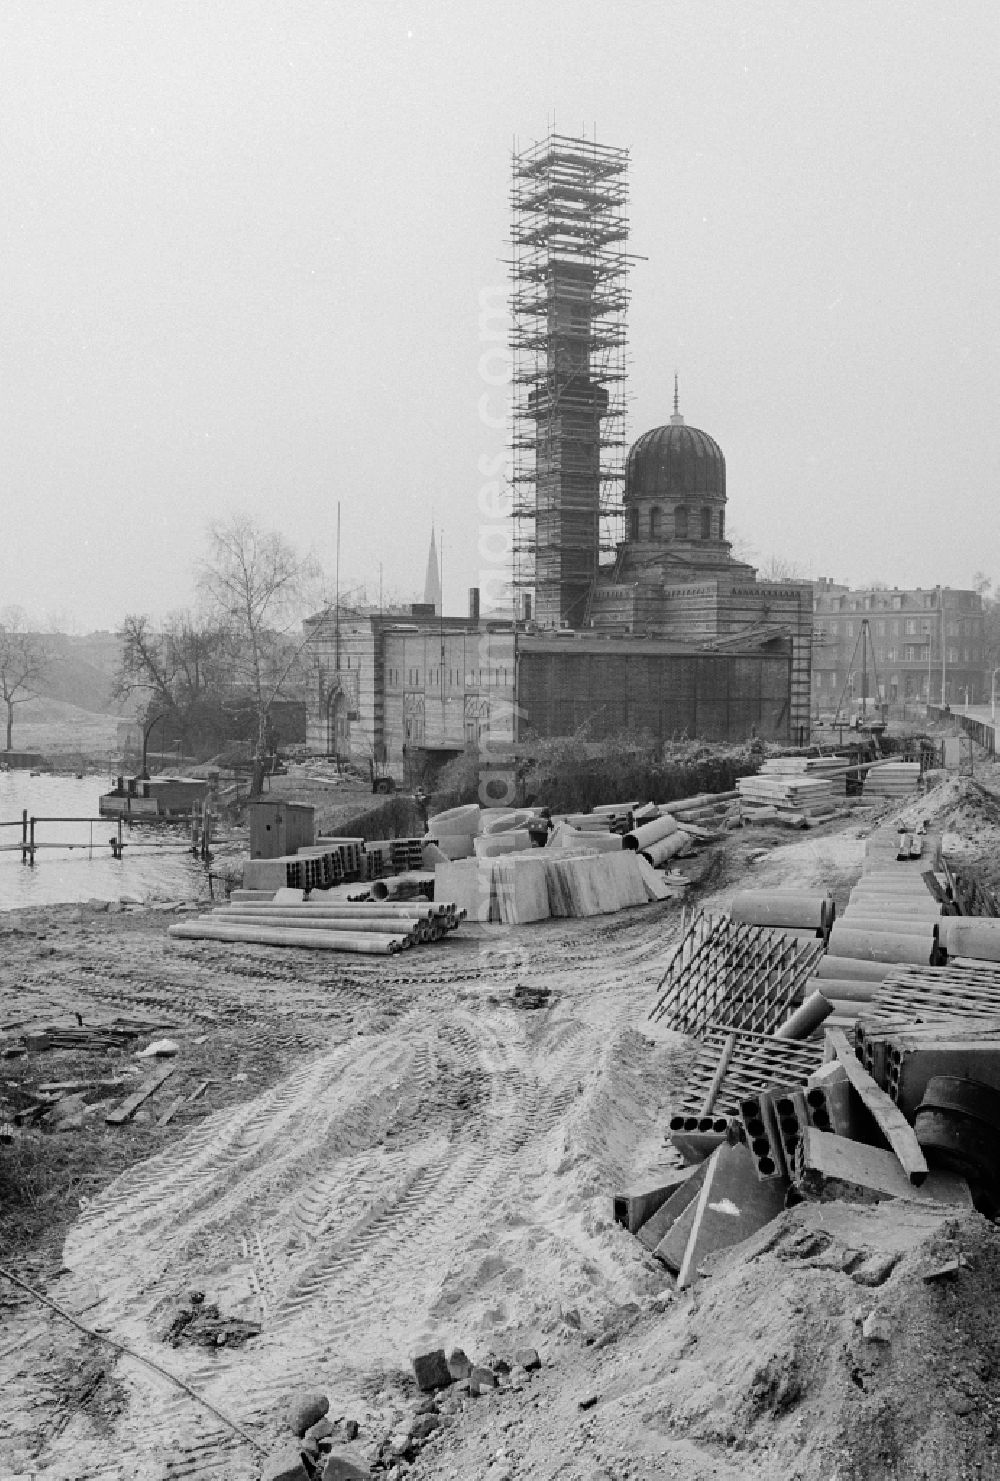 Potsdam: Construction work on the former steam engine house for Sanssouci - also called pump house in Potsdam in the federal state Brandenburg on the territory of the former GDR, German Democratic Republic